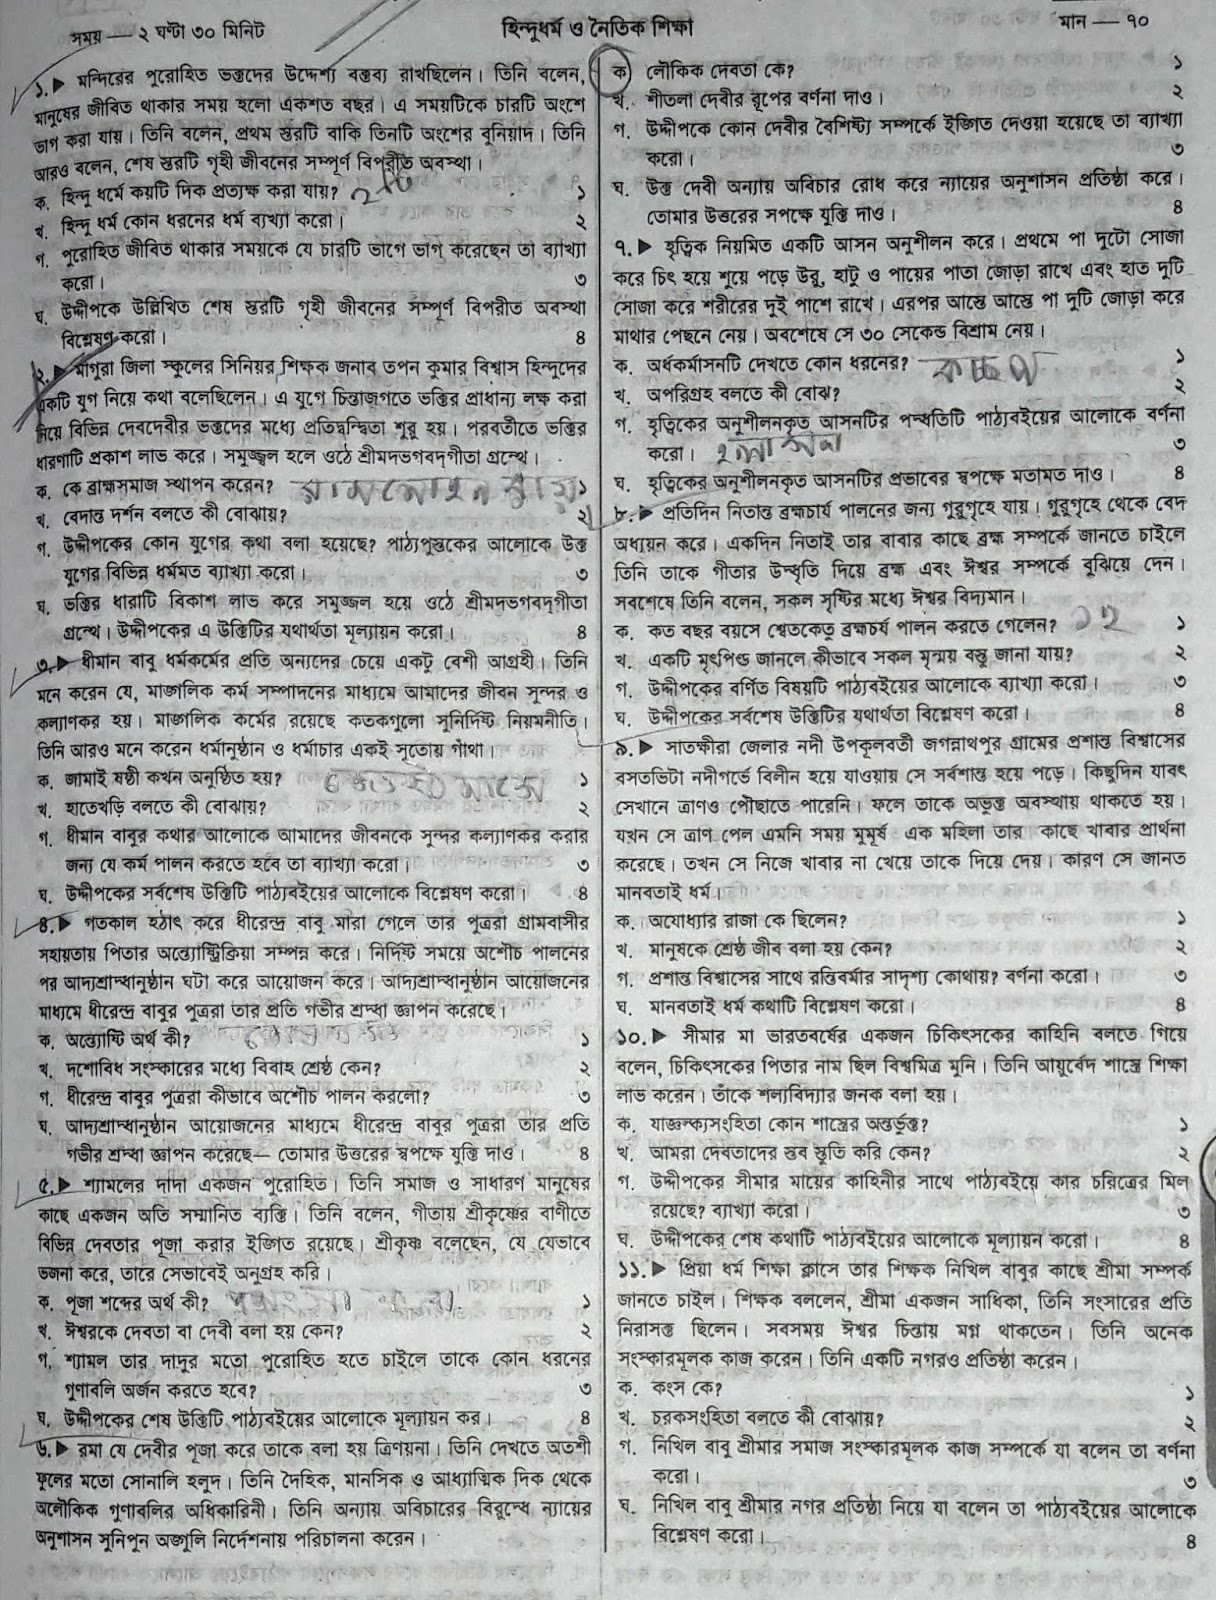 SSC Hindu Dharma suggestion, question paper, model question, mcq question, question pattern, syllabus for dhaka board, all boards